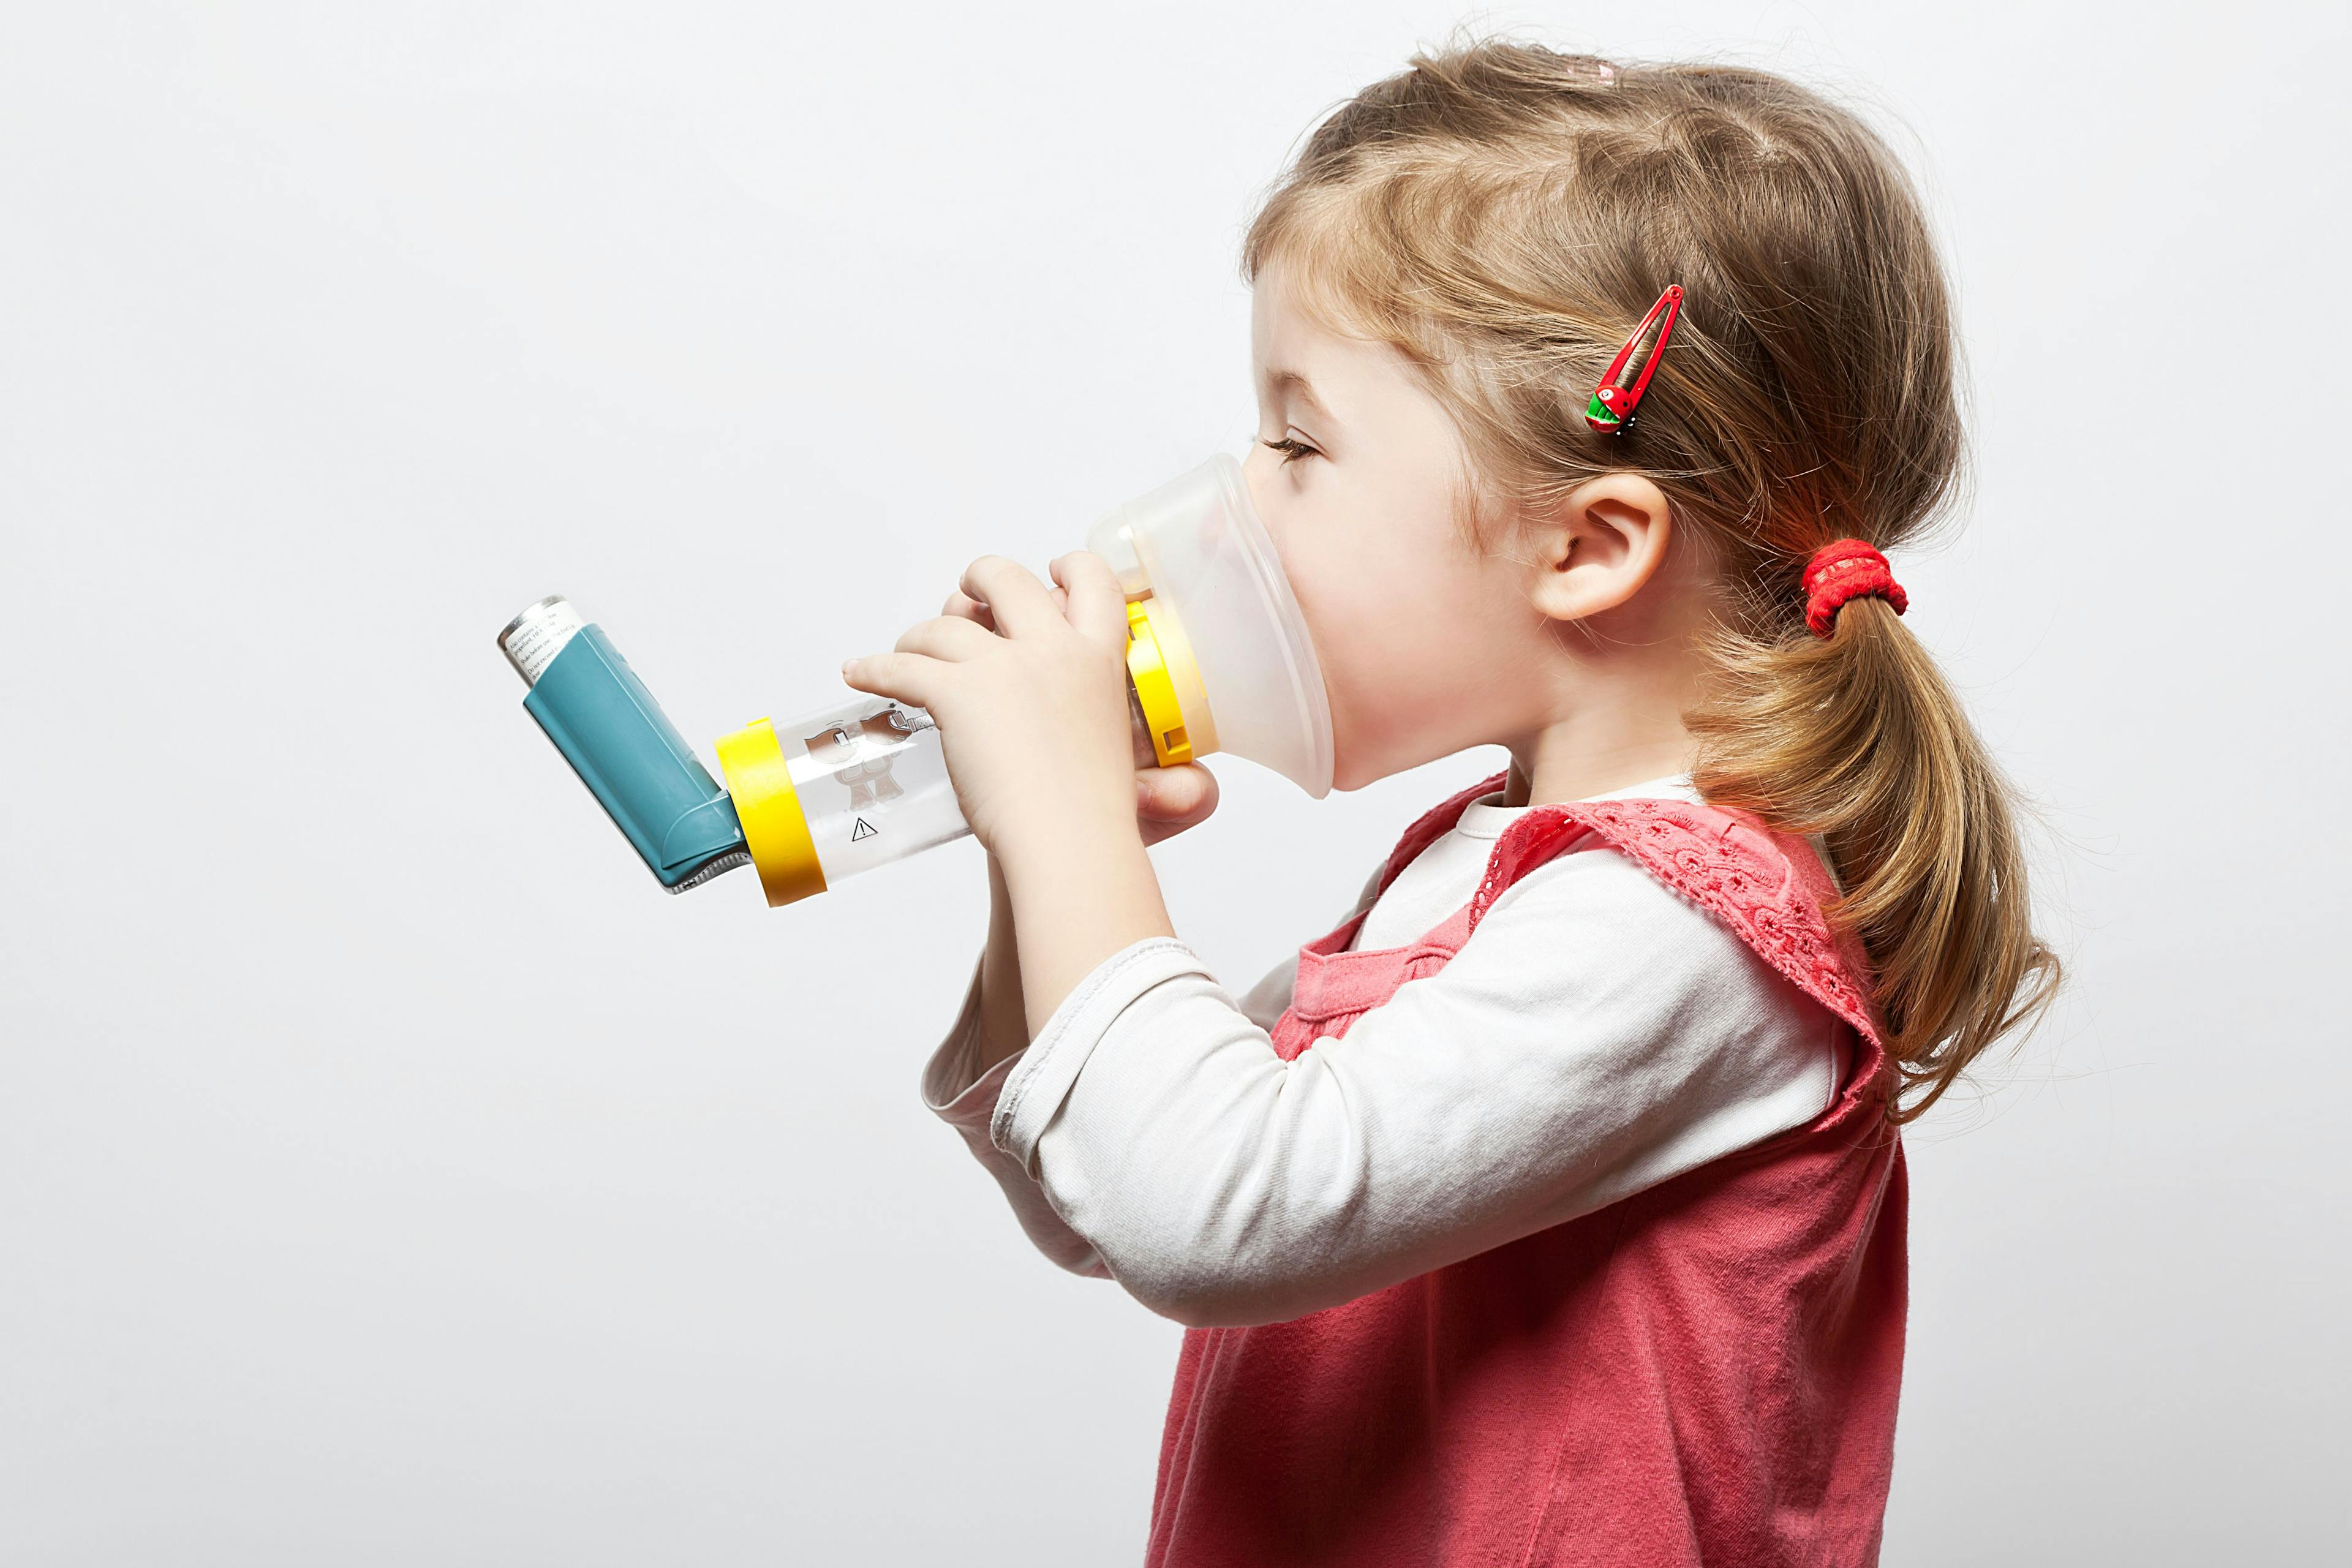 Best practices for pediatricians in diagnosing and treating asthma : © photomim - stock.adobe.com